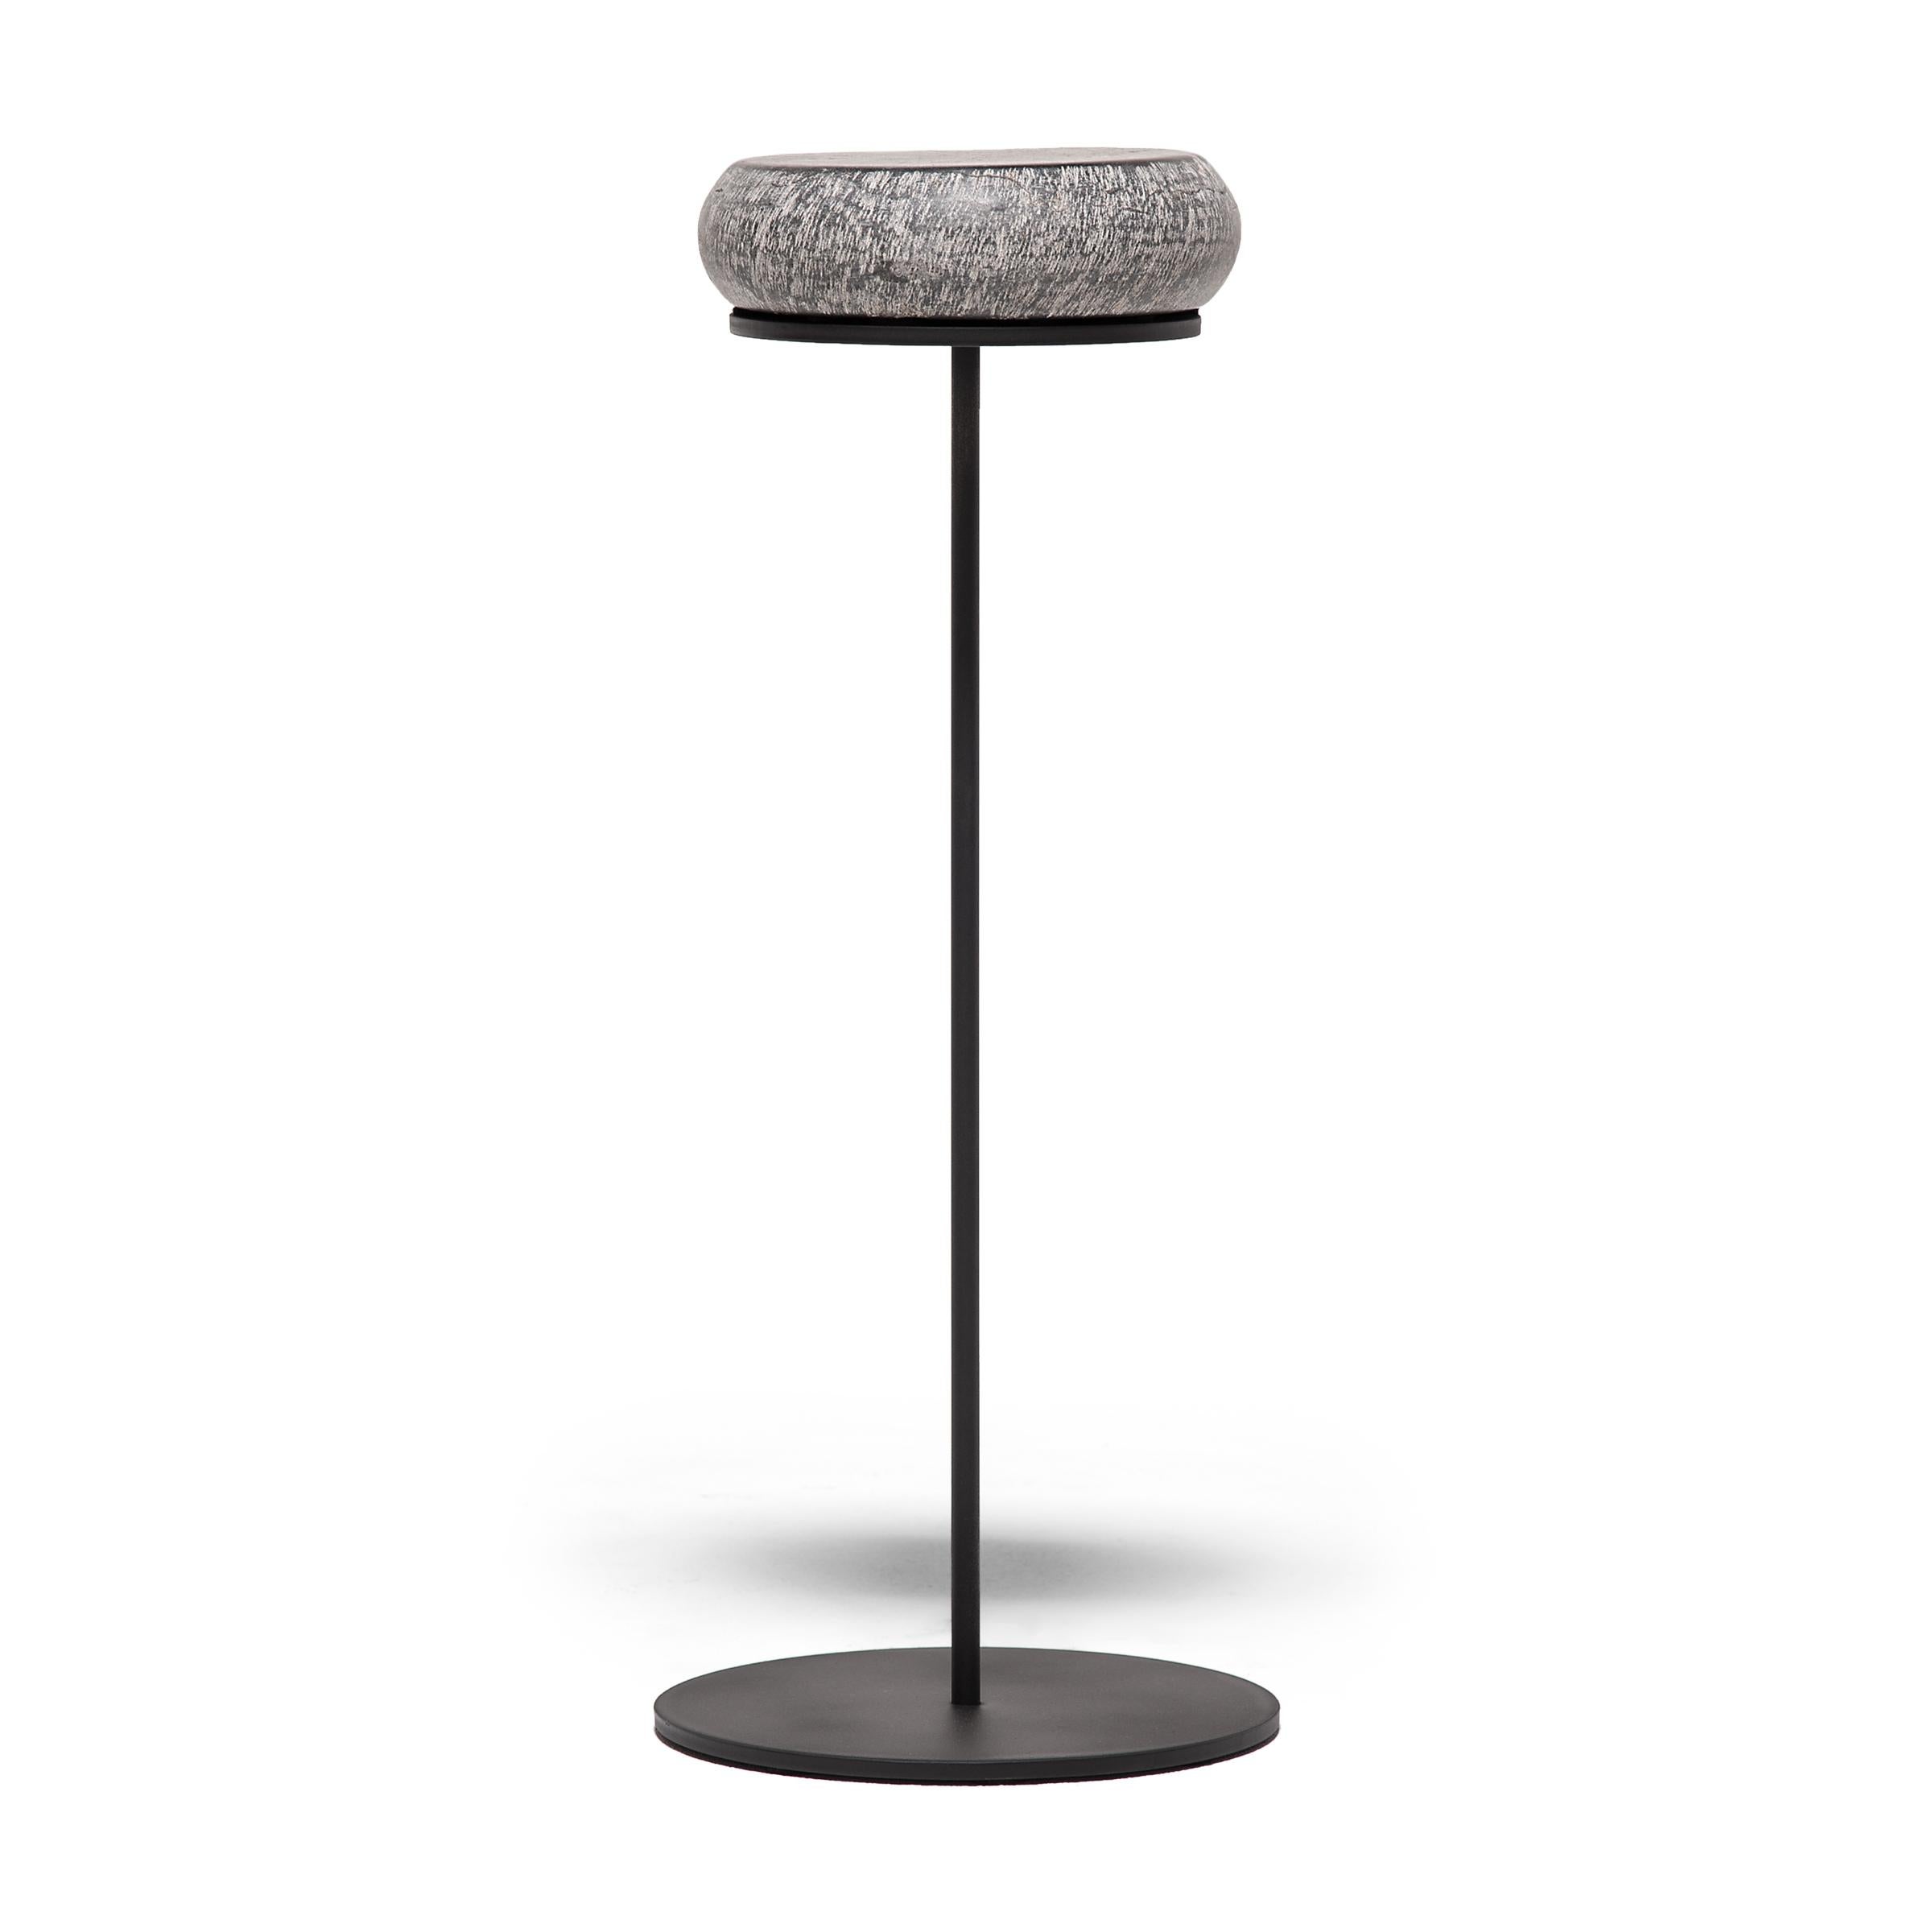 The stone top of this petite drum table references the form of a traditional hand held fish drum. In Taoist mythology the fish drum was the symbol of Zhang Guolao, one of the mythical Eight Immortals. A storied eccentric, Zhang was believed to have